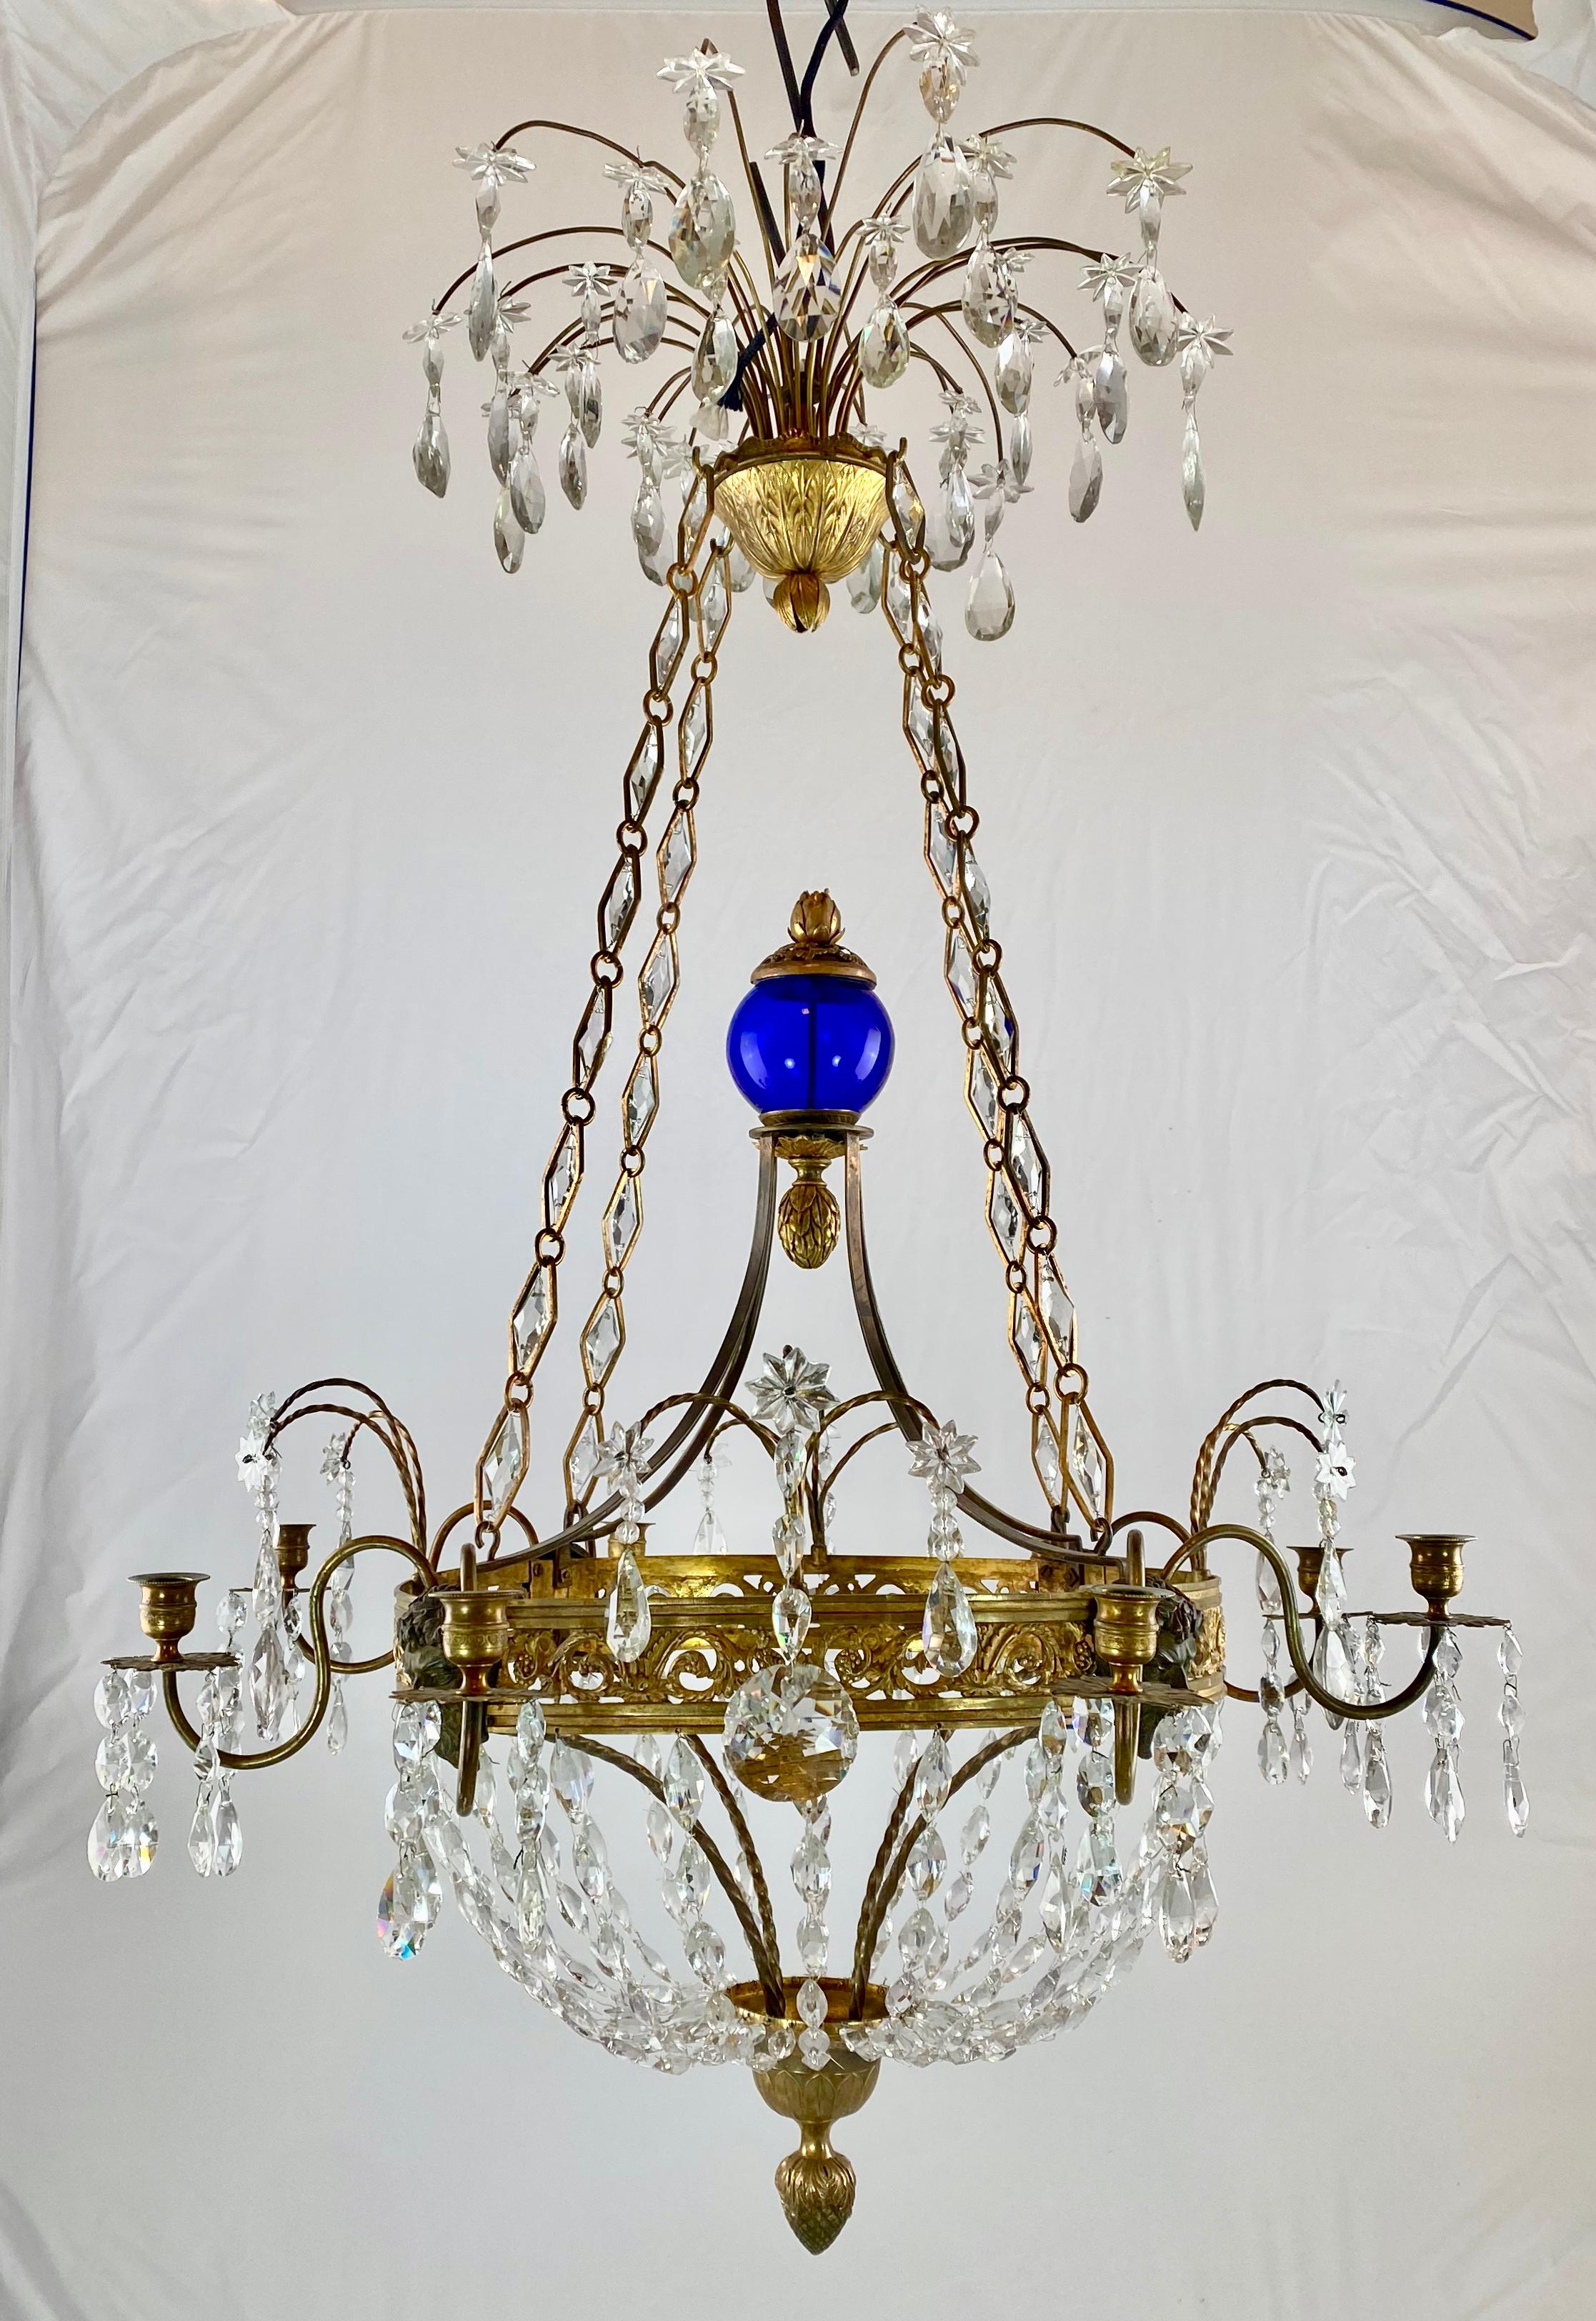 A Russian chandelier made in the early 19th c. Wonderful light design with large grotesque face masks on the ring holding the candlearms. The candleholders in shape of urns.
Everything made of either gilt or patinated bronze.